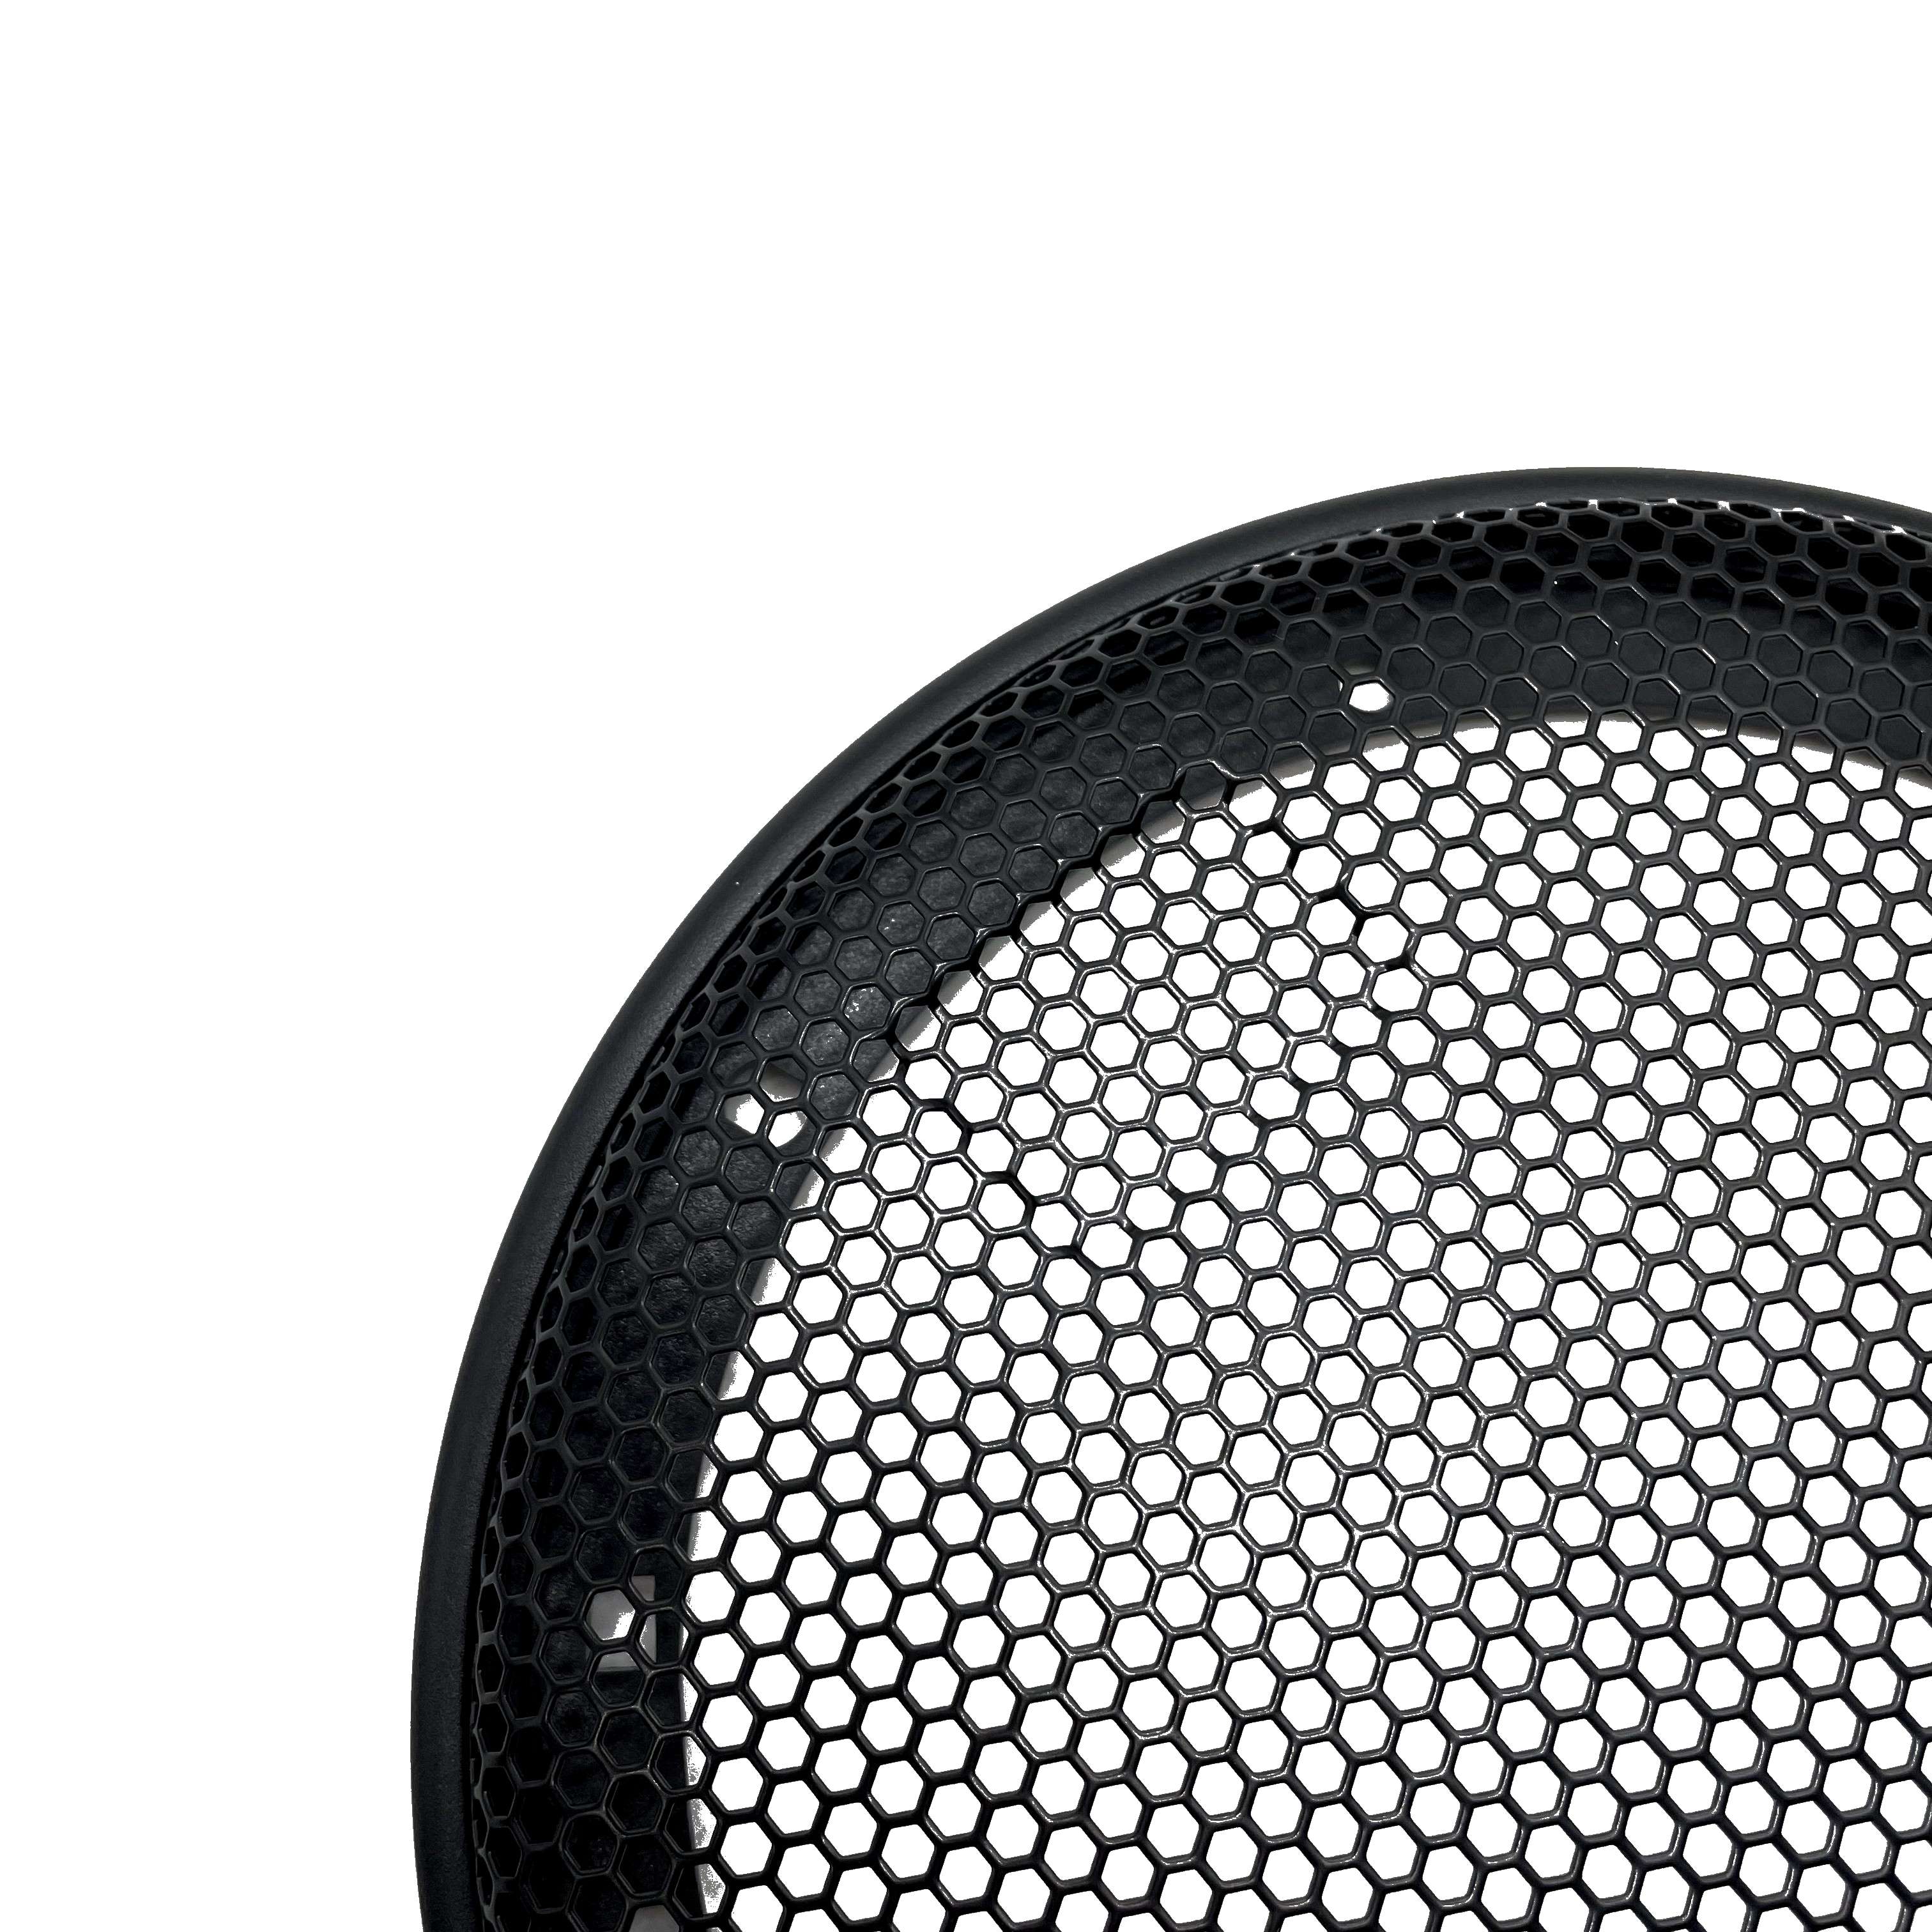 Buy Perforated Plastic Mesh Sheets For Speaker Car Grills from Chongqing  Sunner Import and Export Co., Ltd., China